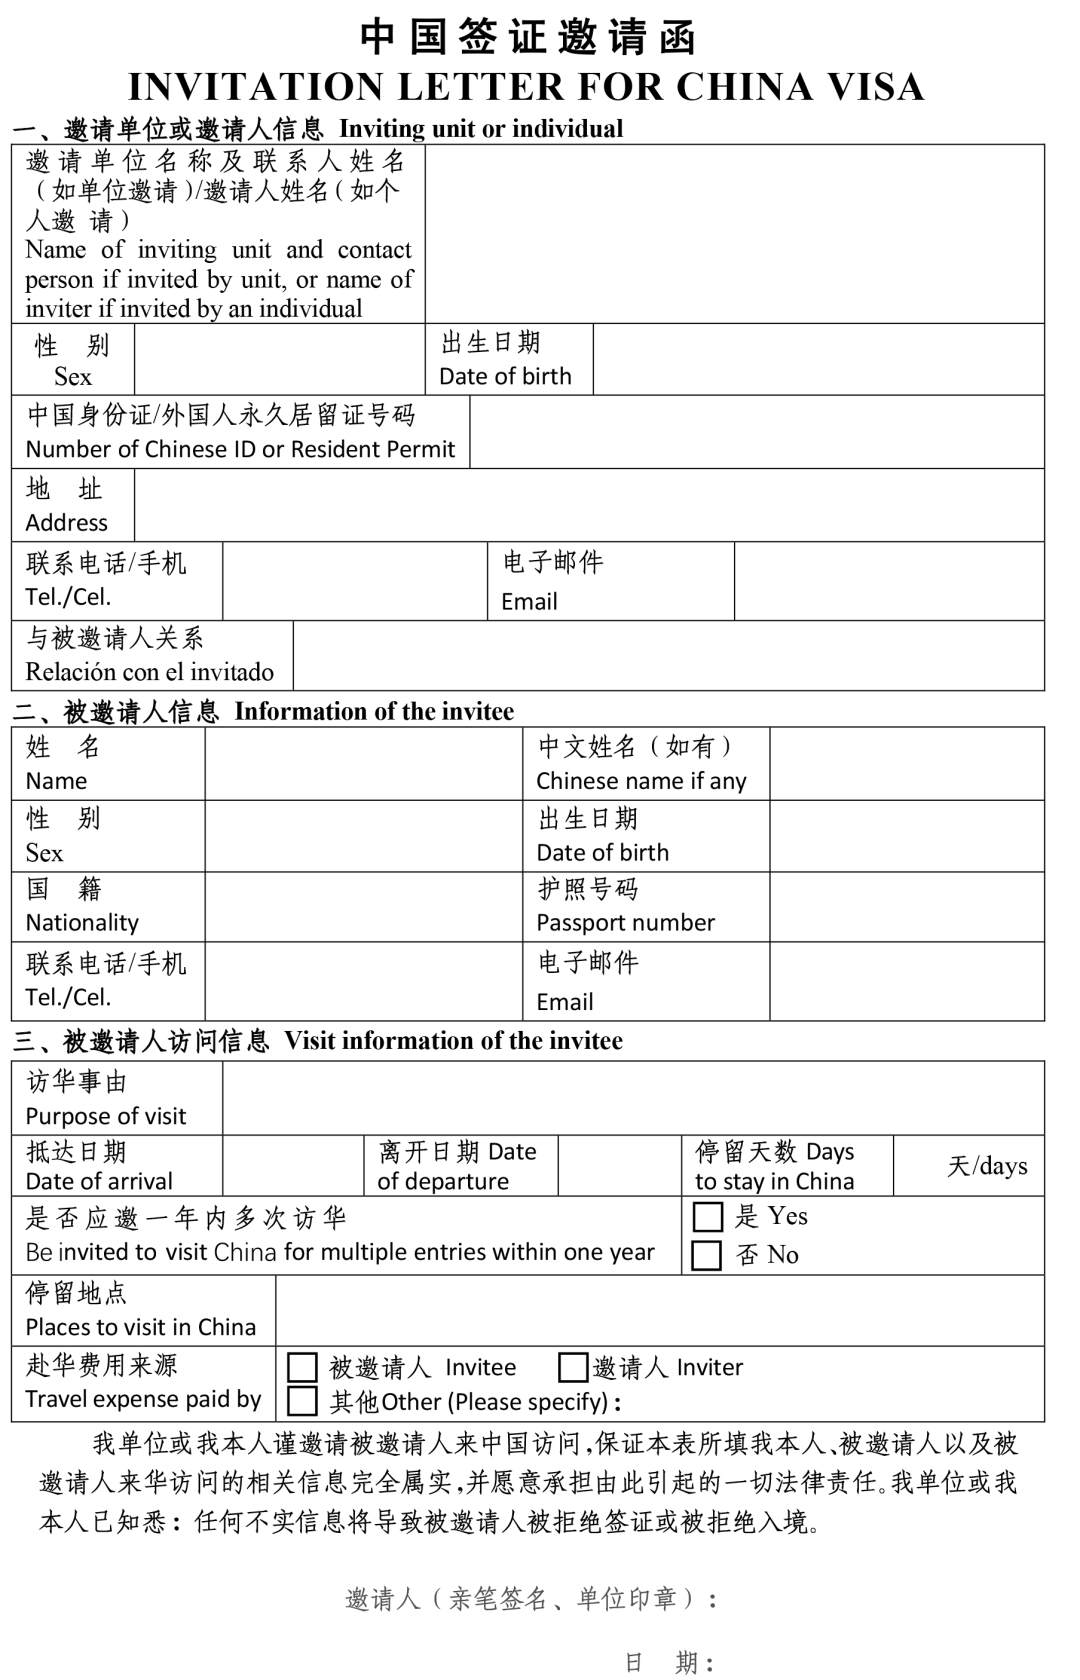 How to get an invitation letter if you want to visit China?